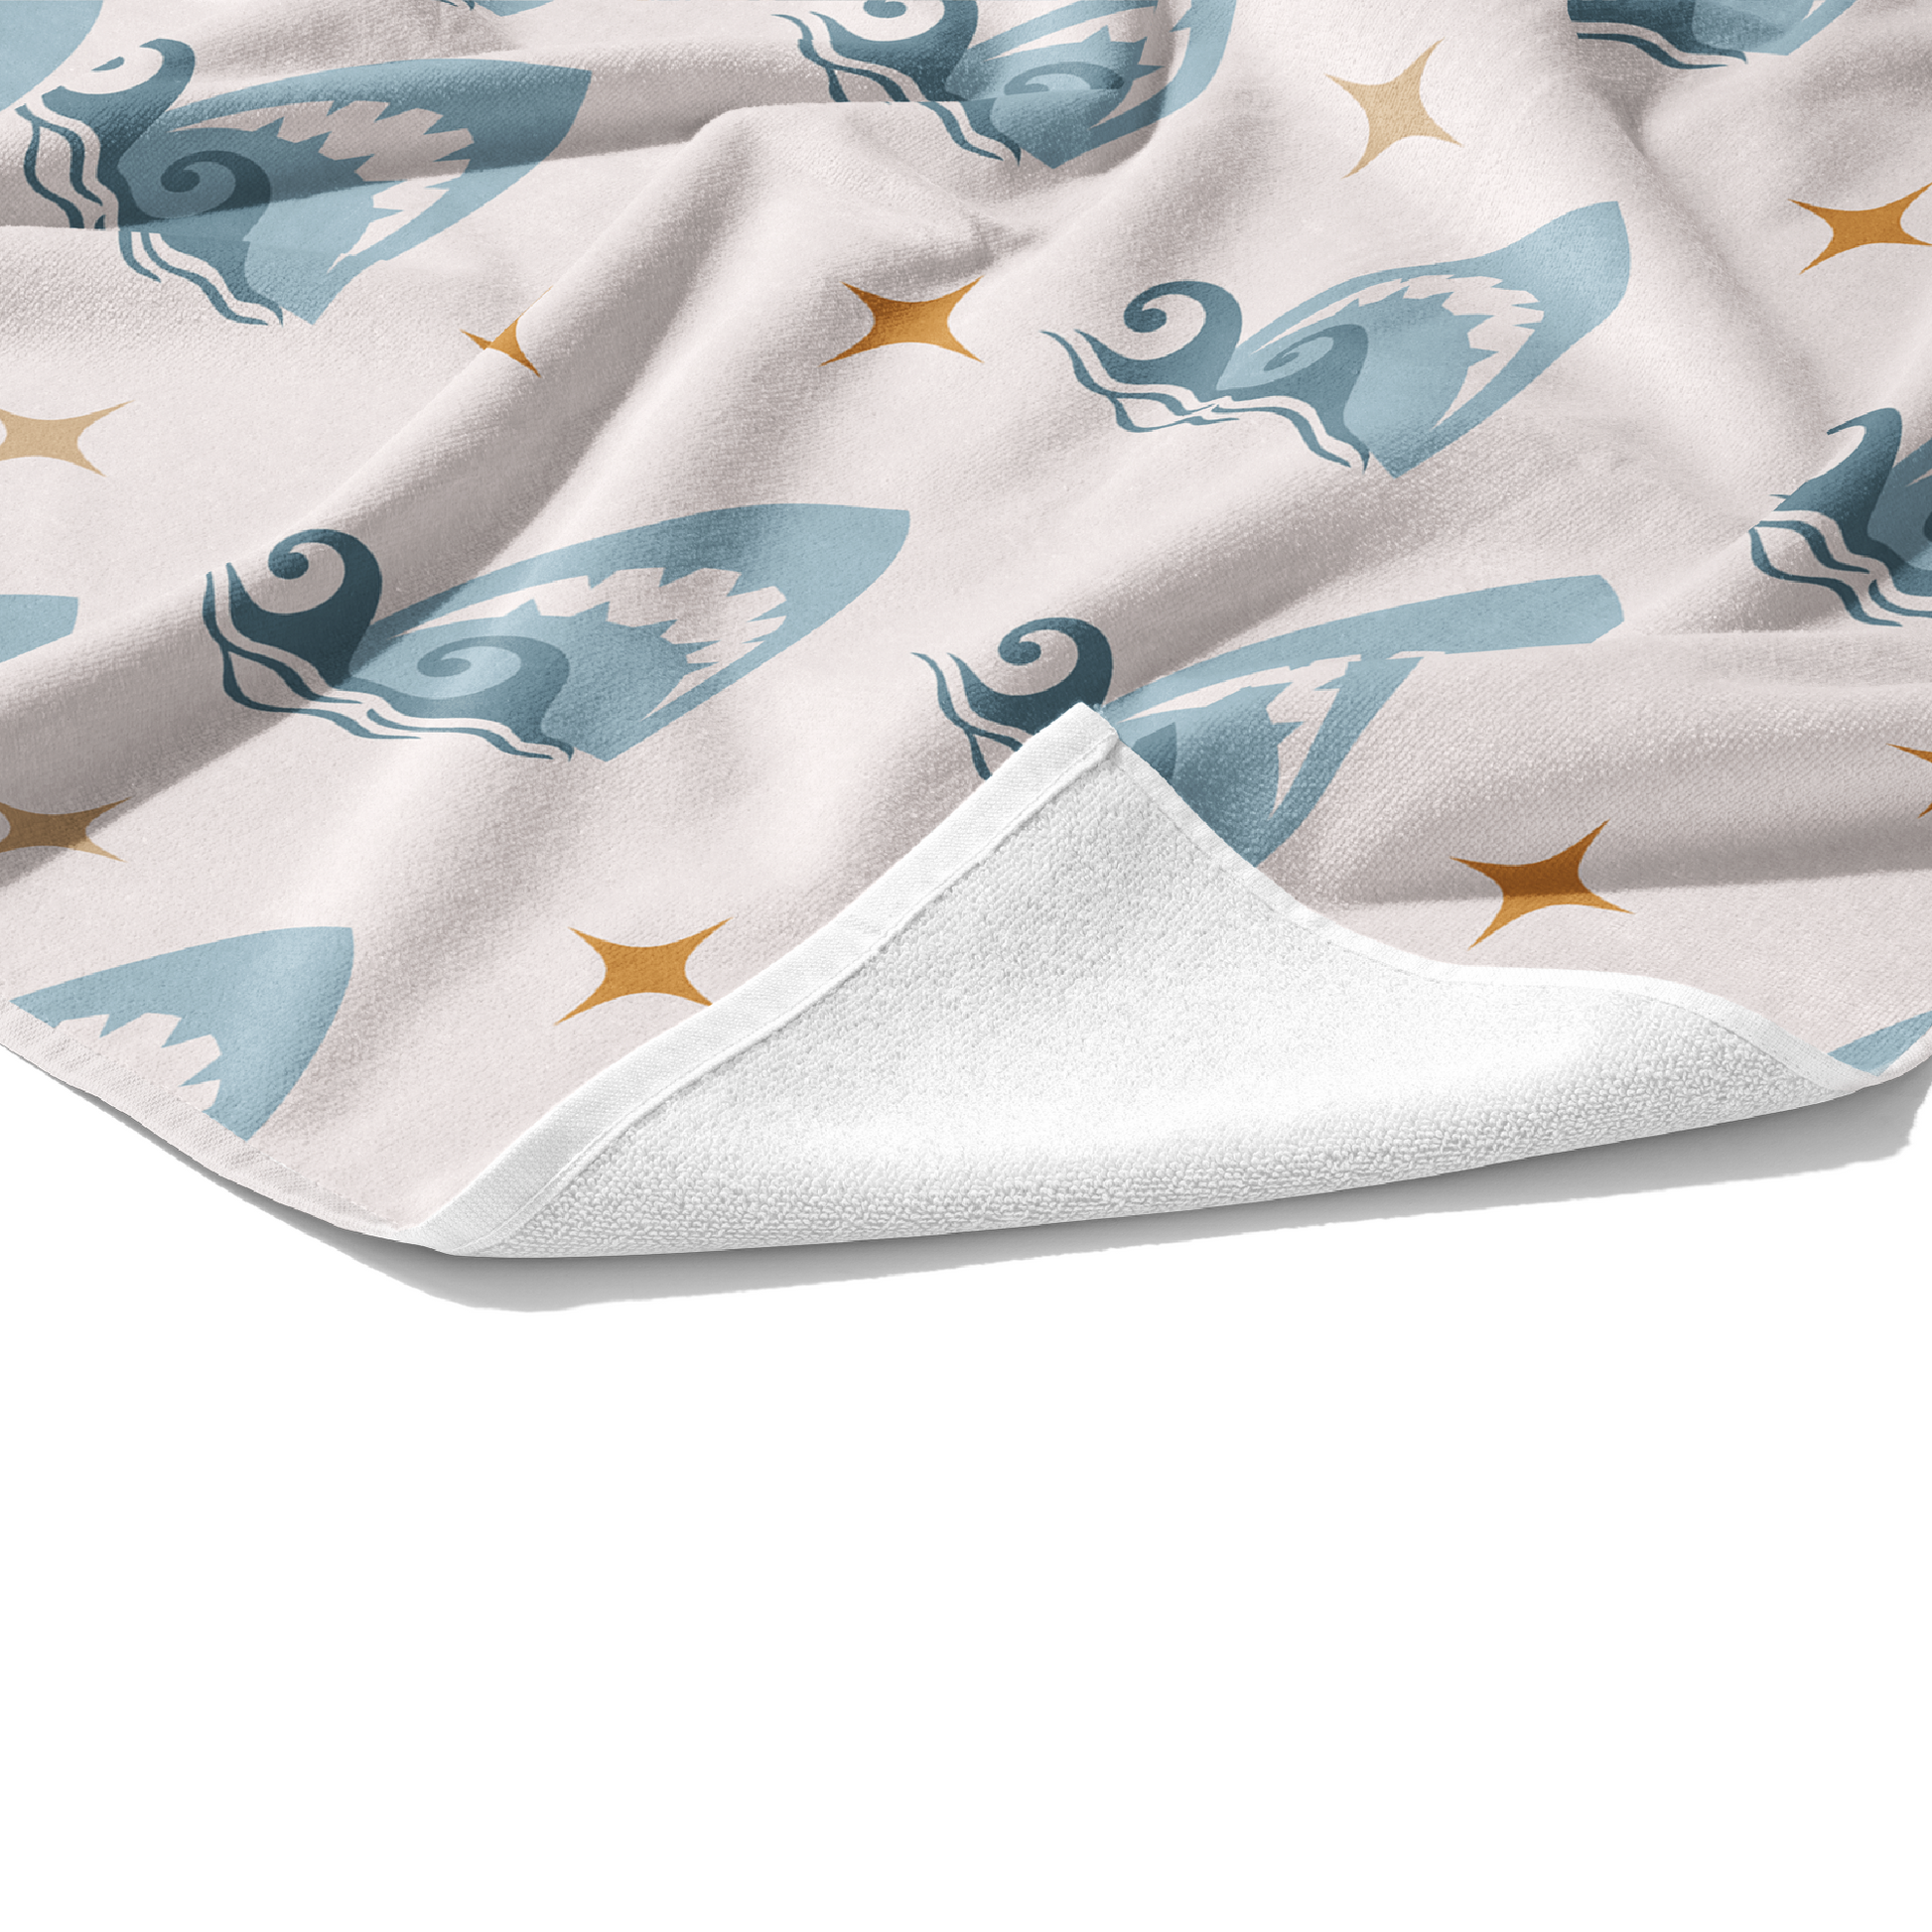 Plush white customizable towel with light blue sharks and blue waves on cream and customizable text.